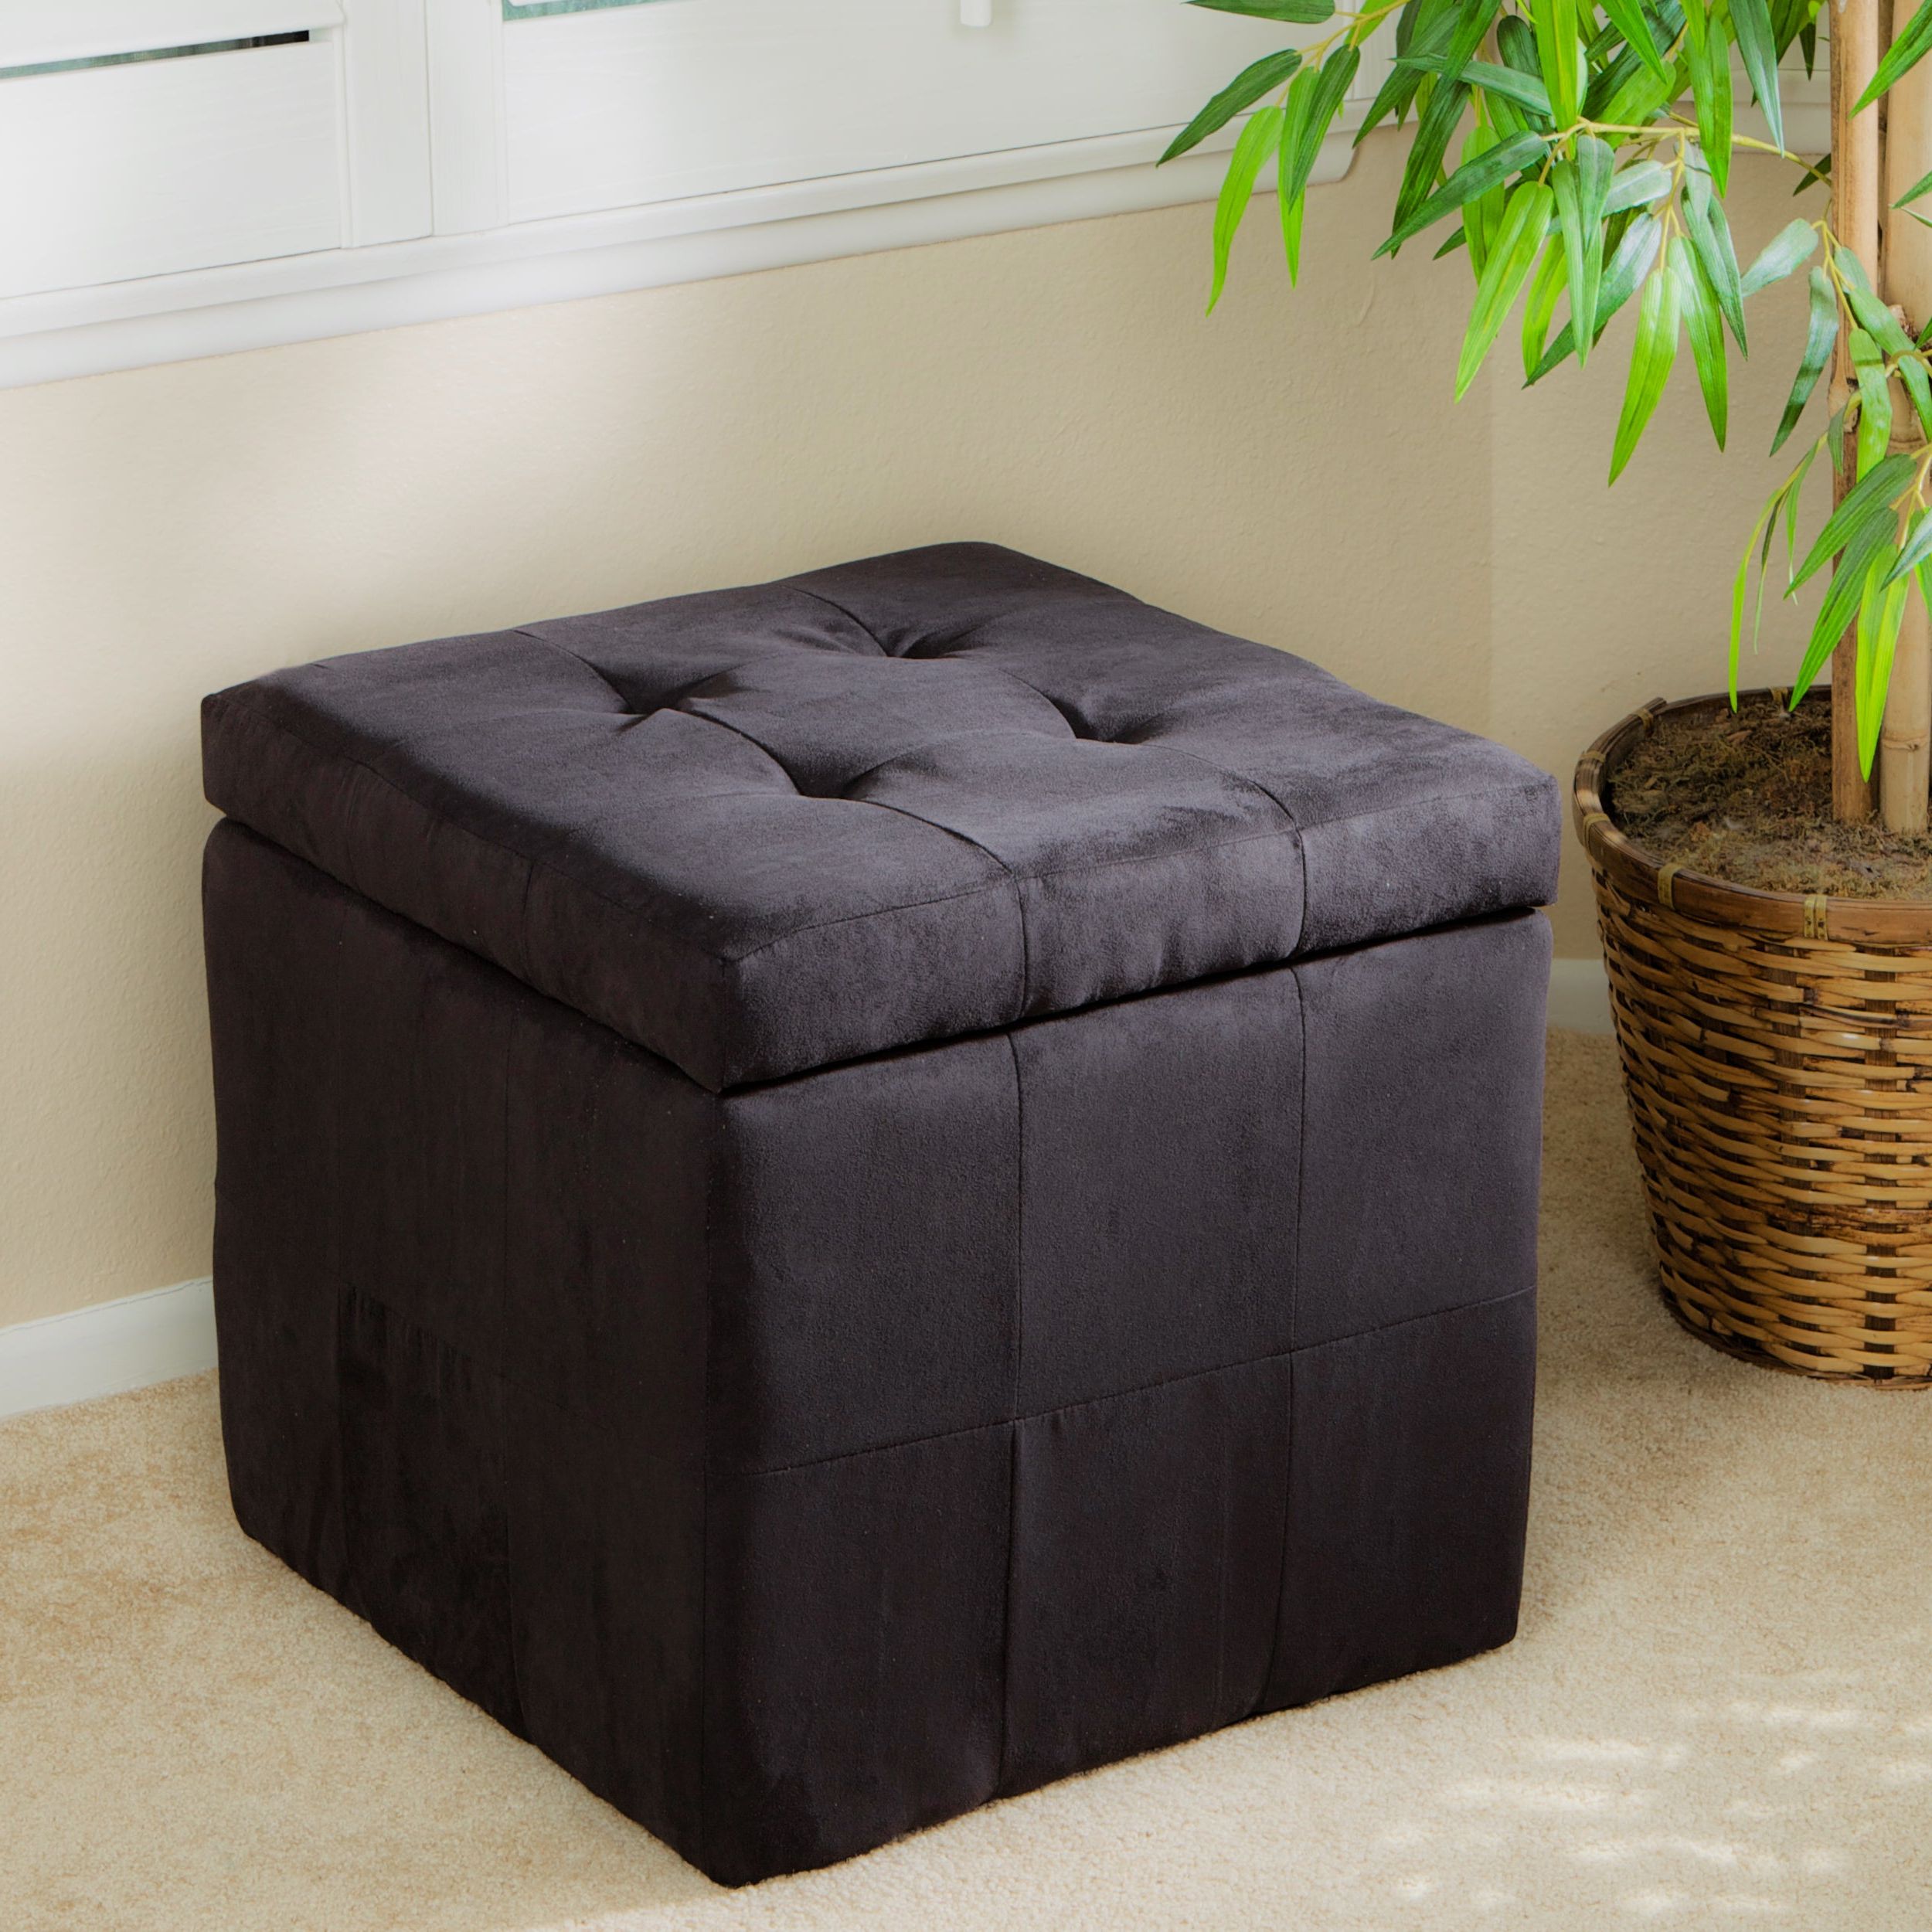 Most Recently Released Tufted Black Fabric Storage Cube Ottoman – 13915122 – Overstock Intended For Stripe Black And White Square Cube Ottomans (View 2 of 10)